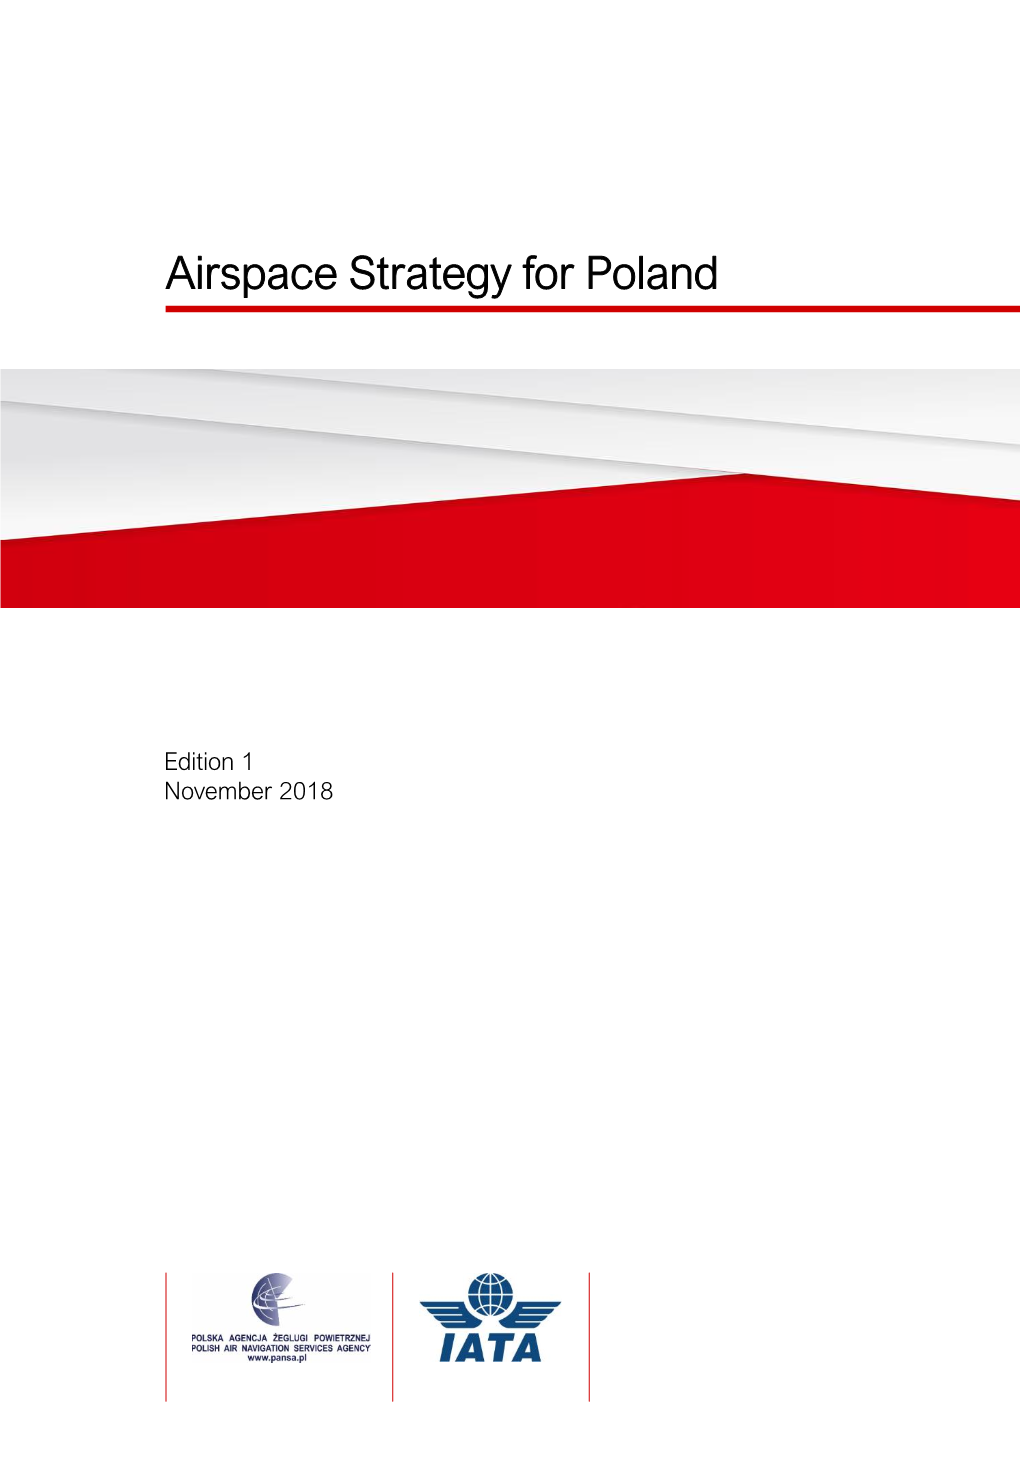 Airspace Strategy for Poland